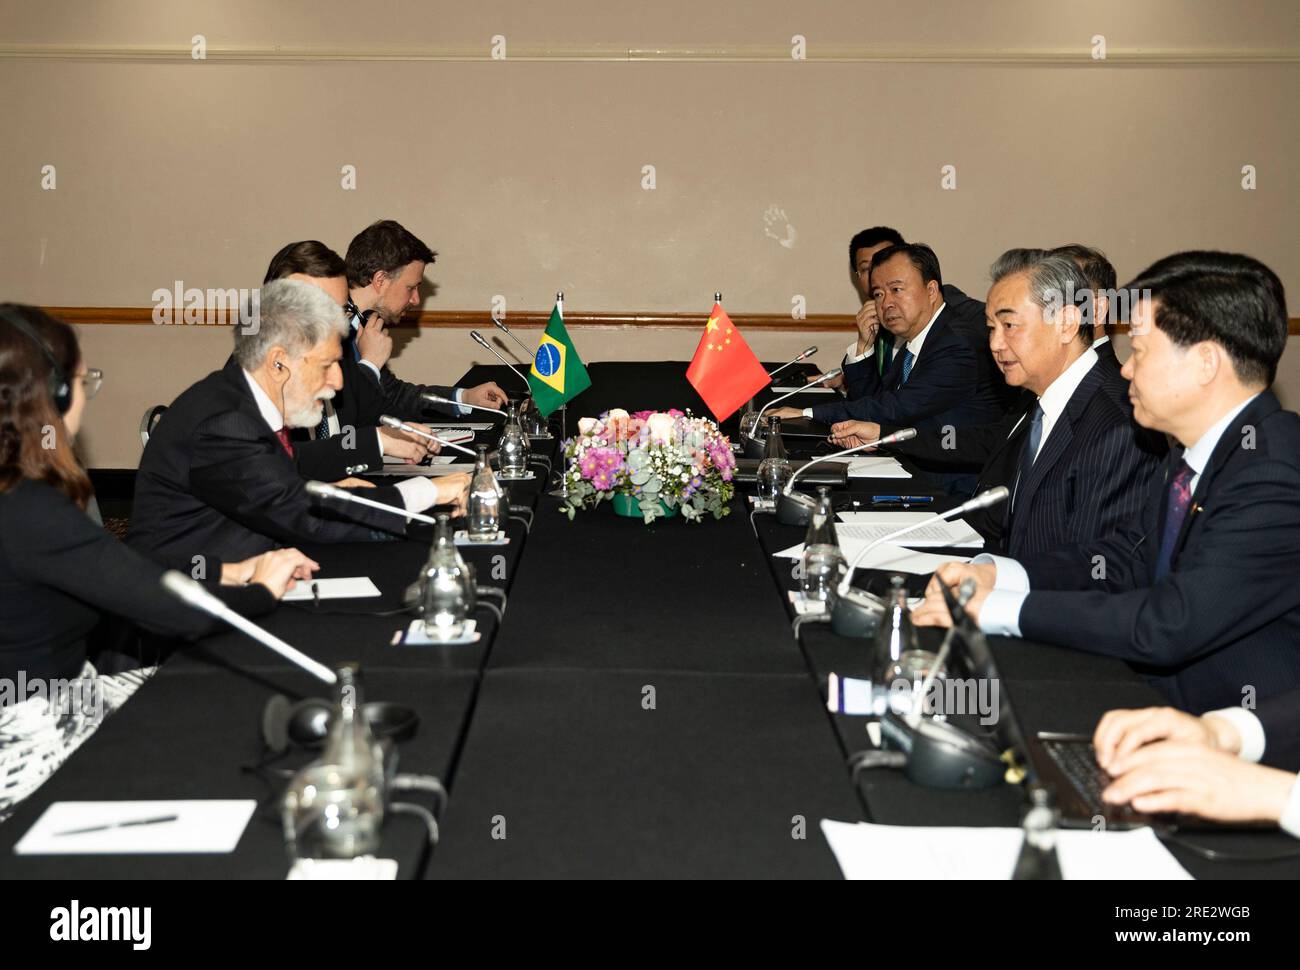 Johannesburg, South Africa. 24th July, 2023. Wang Yi (2nd R), director of the Office of the Communist Party of China Central Commission for Foreign Affairs, meets with Celso Luiz Nunes Amorim (2nd L), chief advisor of the Presidency of Brazil, in Johannesburg, South Africa, on July 24, 2023. Credit: Zhang Yudong/Xinhua/Alamy Live News Stock Photo